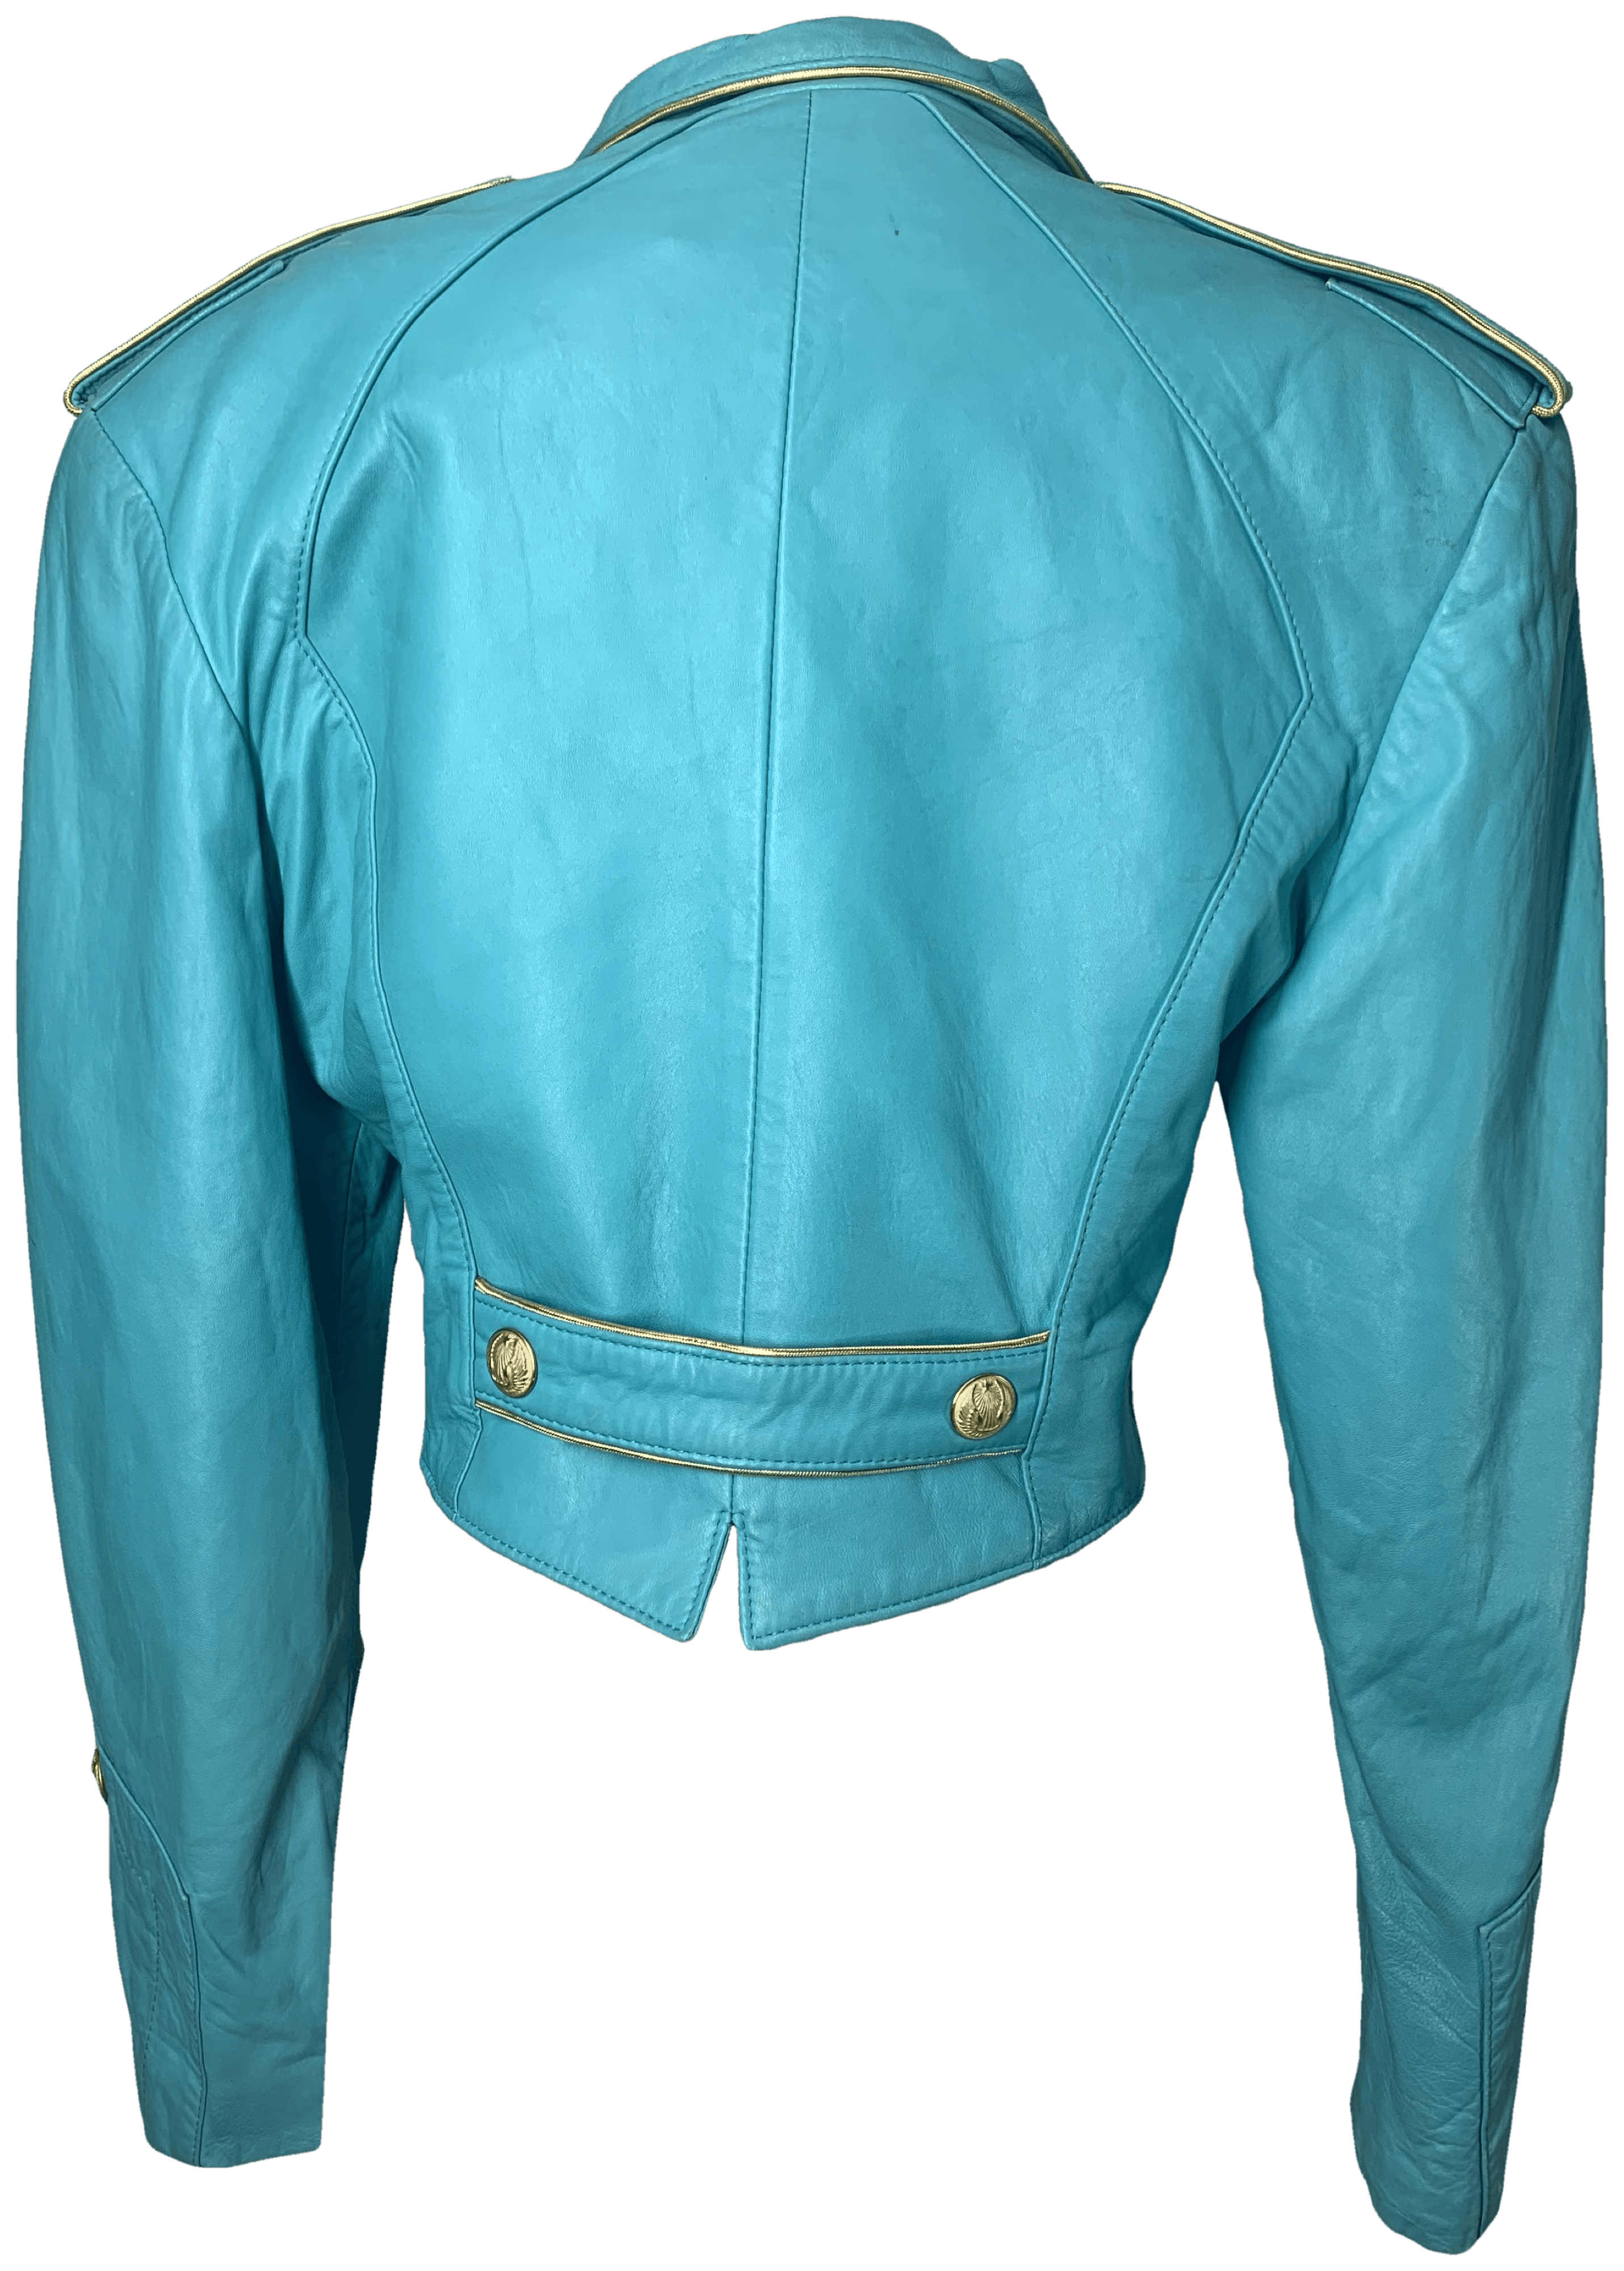 Vintage Teal Leather Jacket by Micheal Hoban For North Beach Leather ...